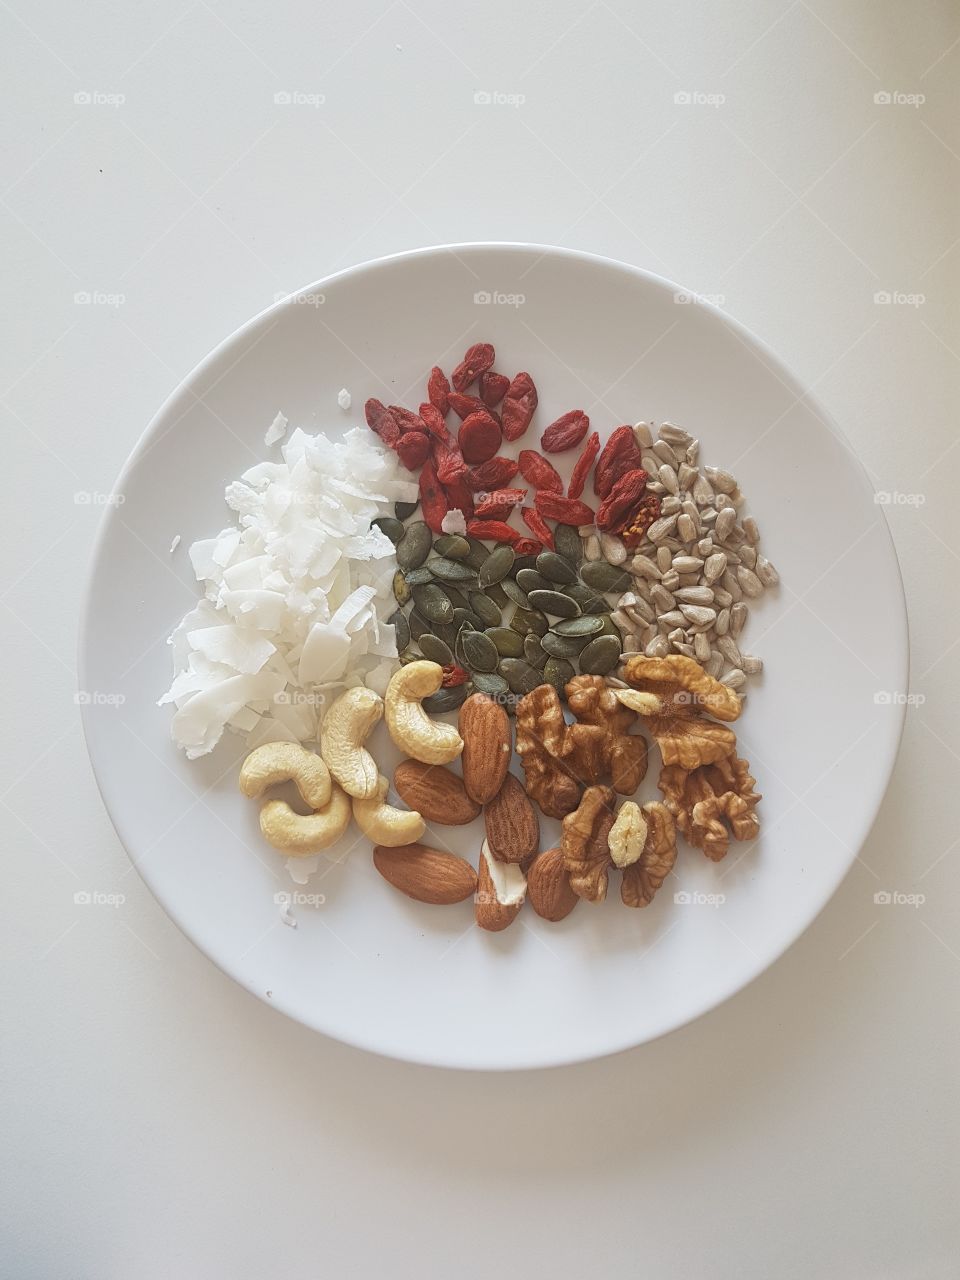 Healthy colorful snack with seads and nuts combined in a white dish.